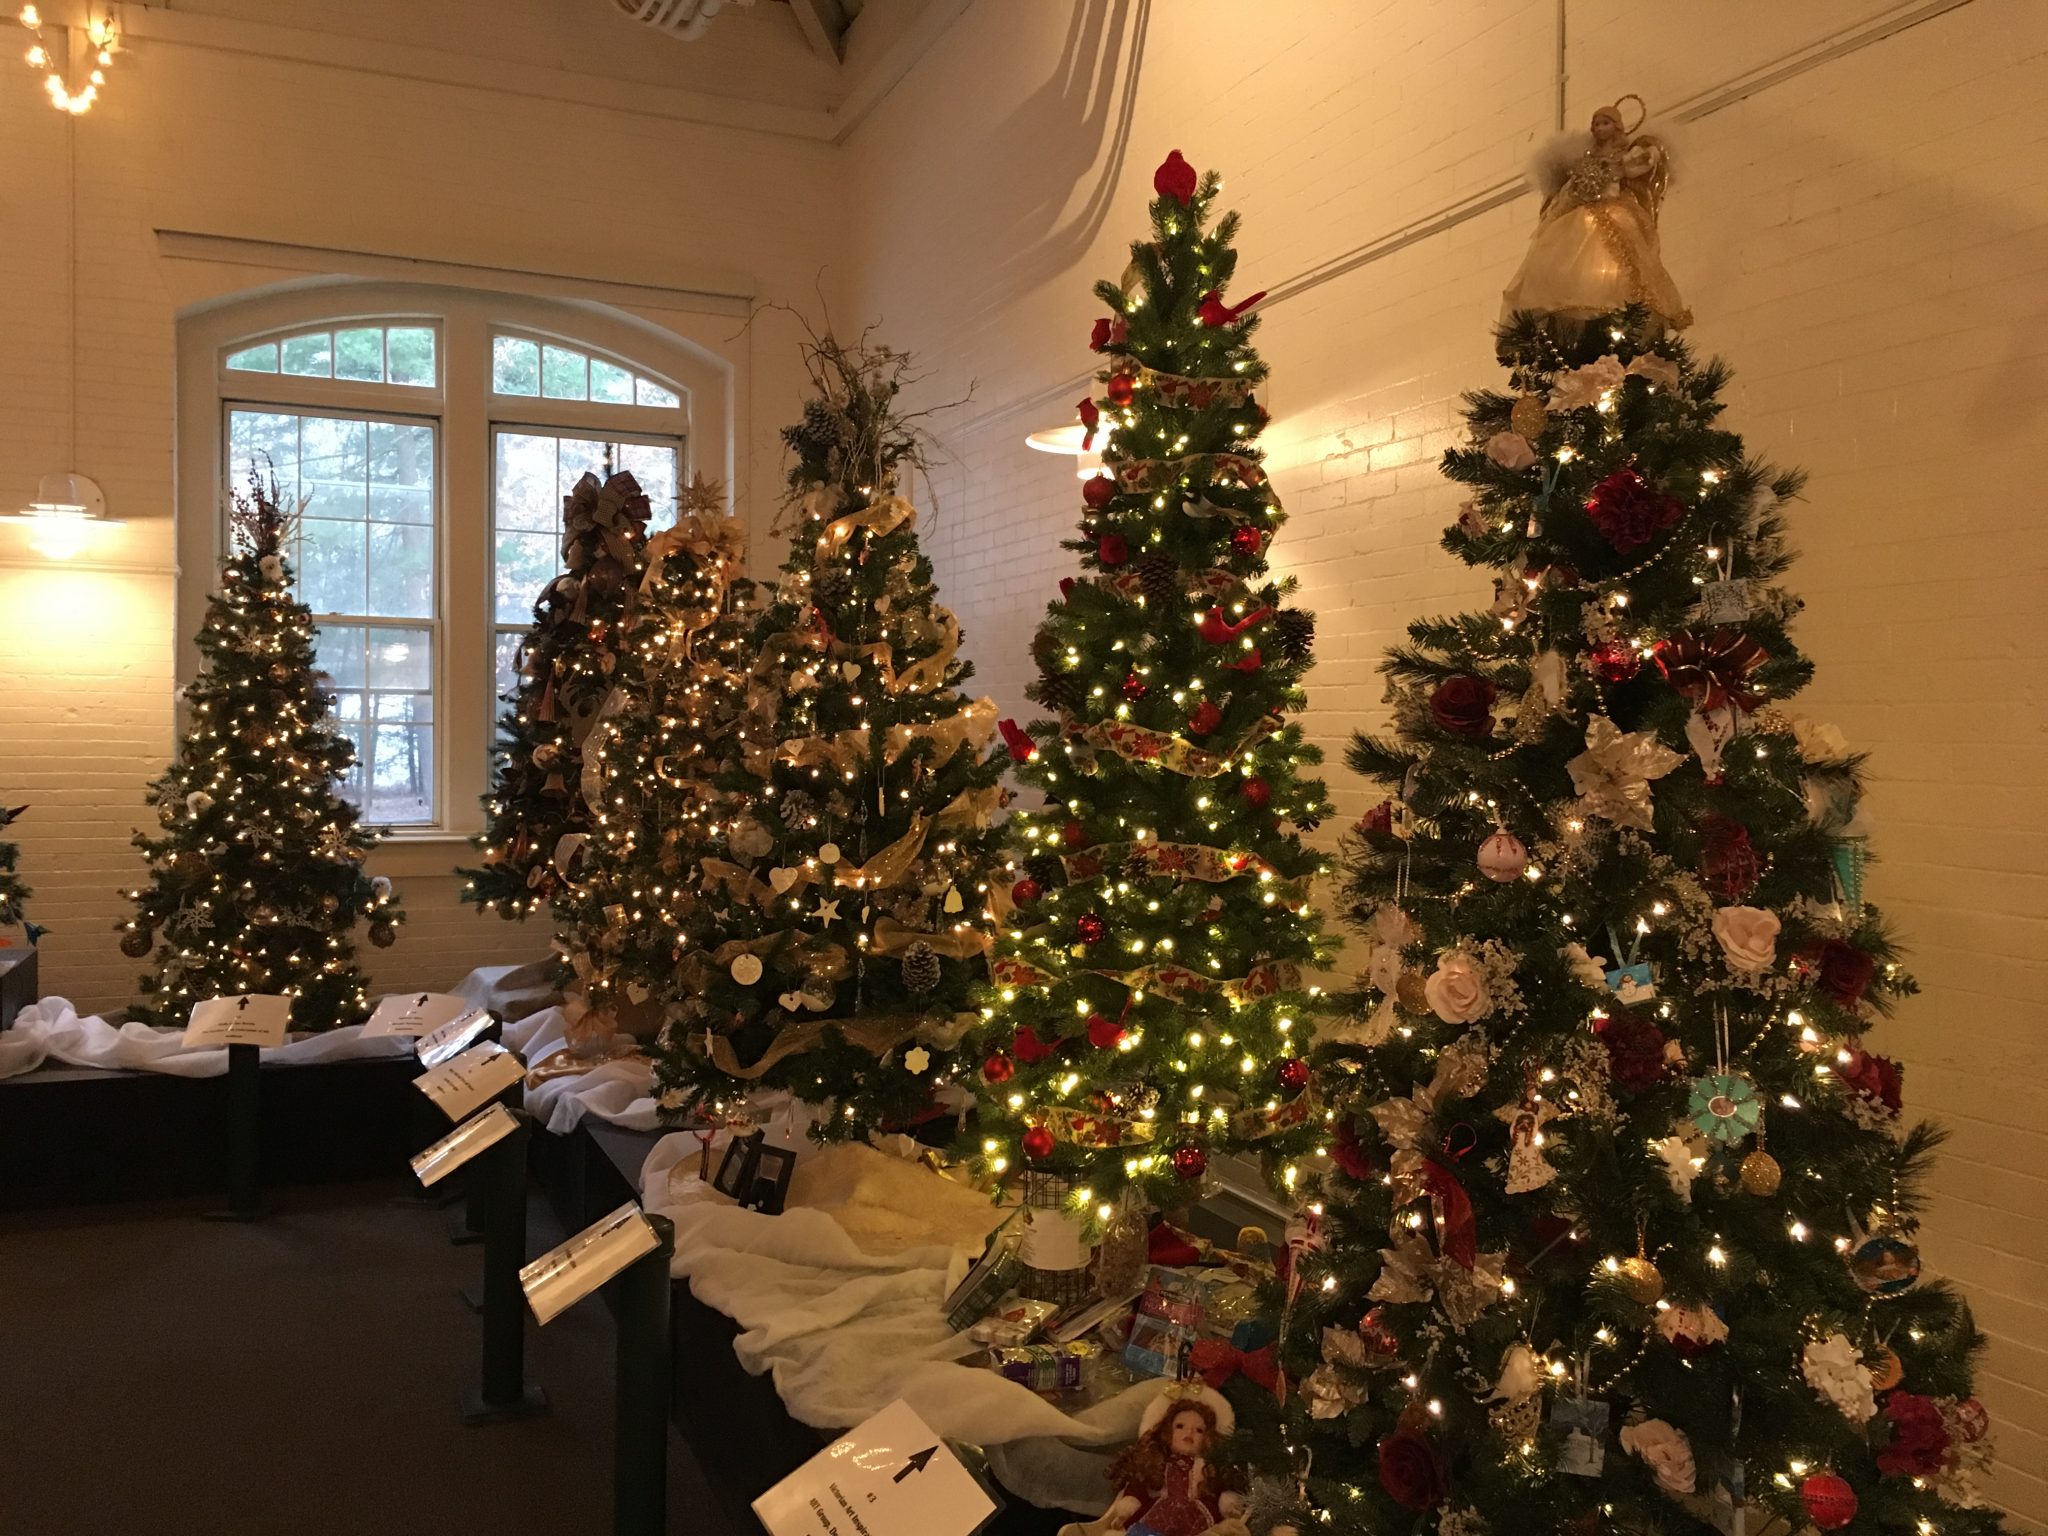 Get in the festive spirit at Mass Hort's Festival of Trees The